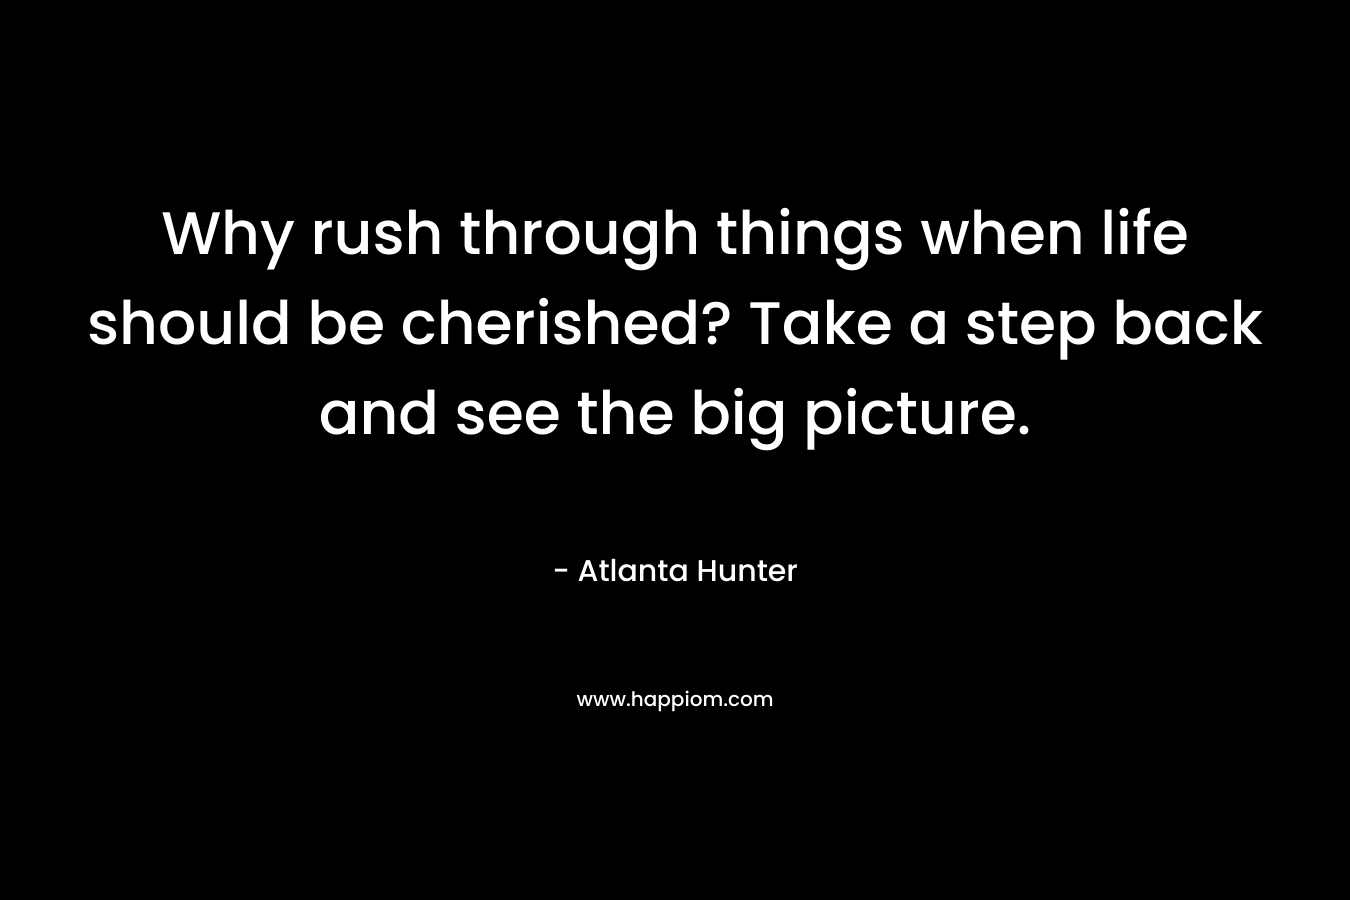 Why rush through things when life should be cherished? Take a step back and see the big picture. – Atlanta Hunter